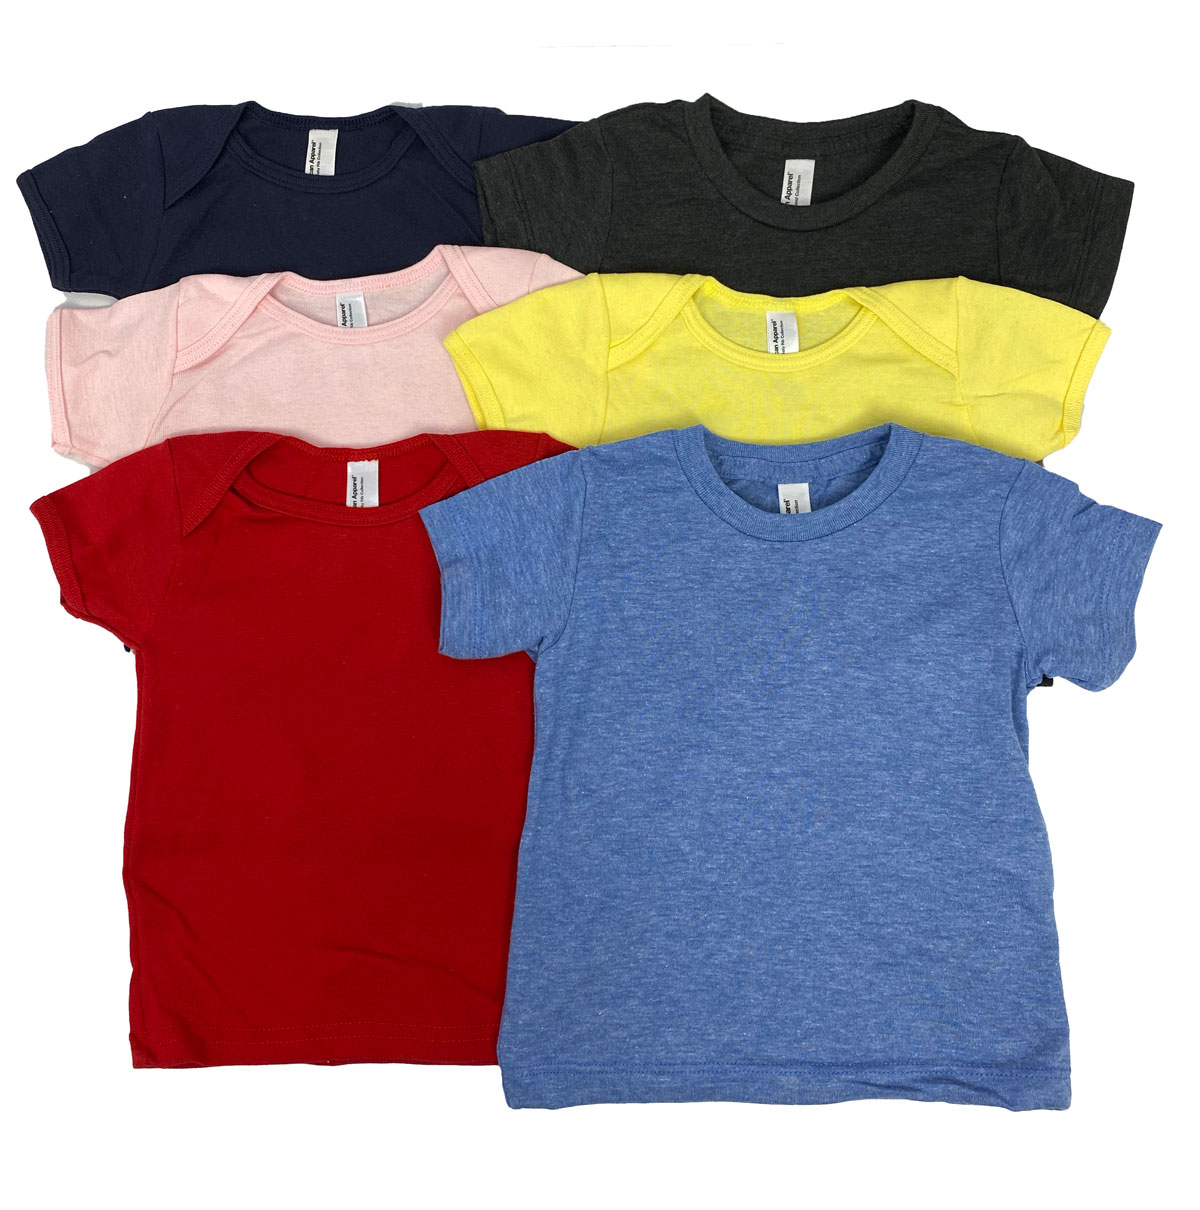 Infant T-Shirts-RG Riley Wholesale Off Price Clothing & Closeout Apparel